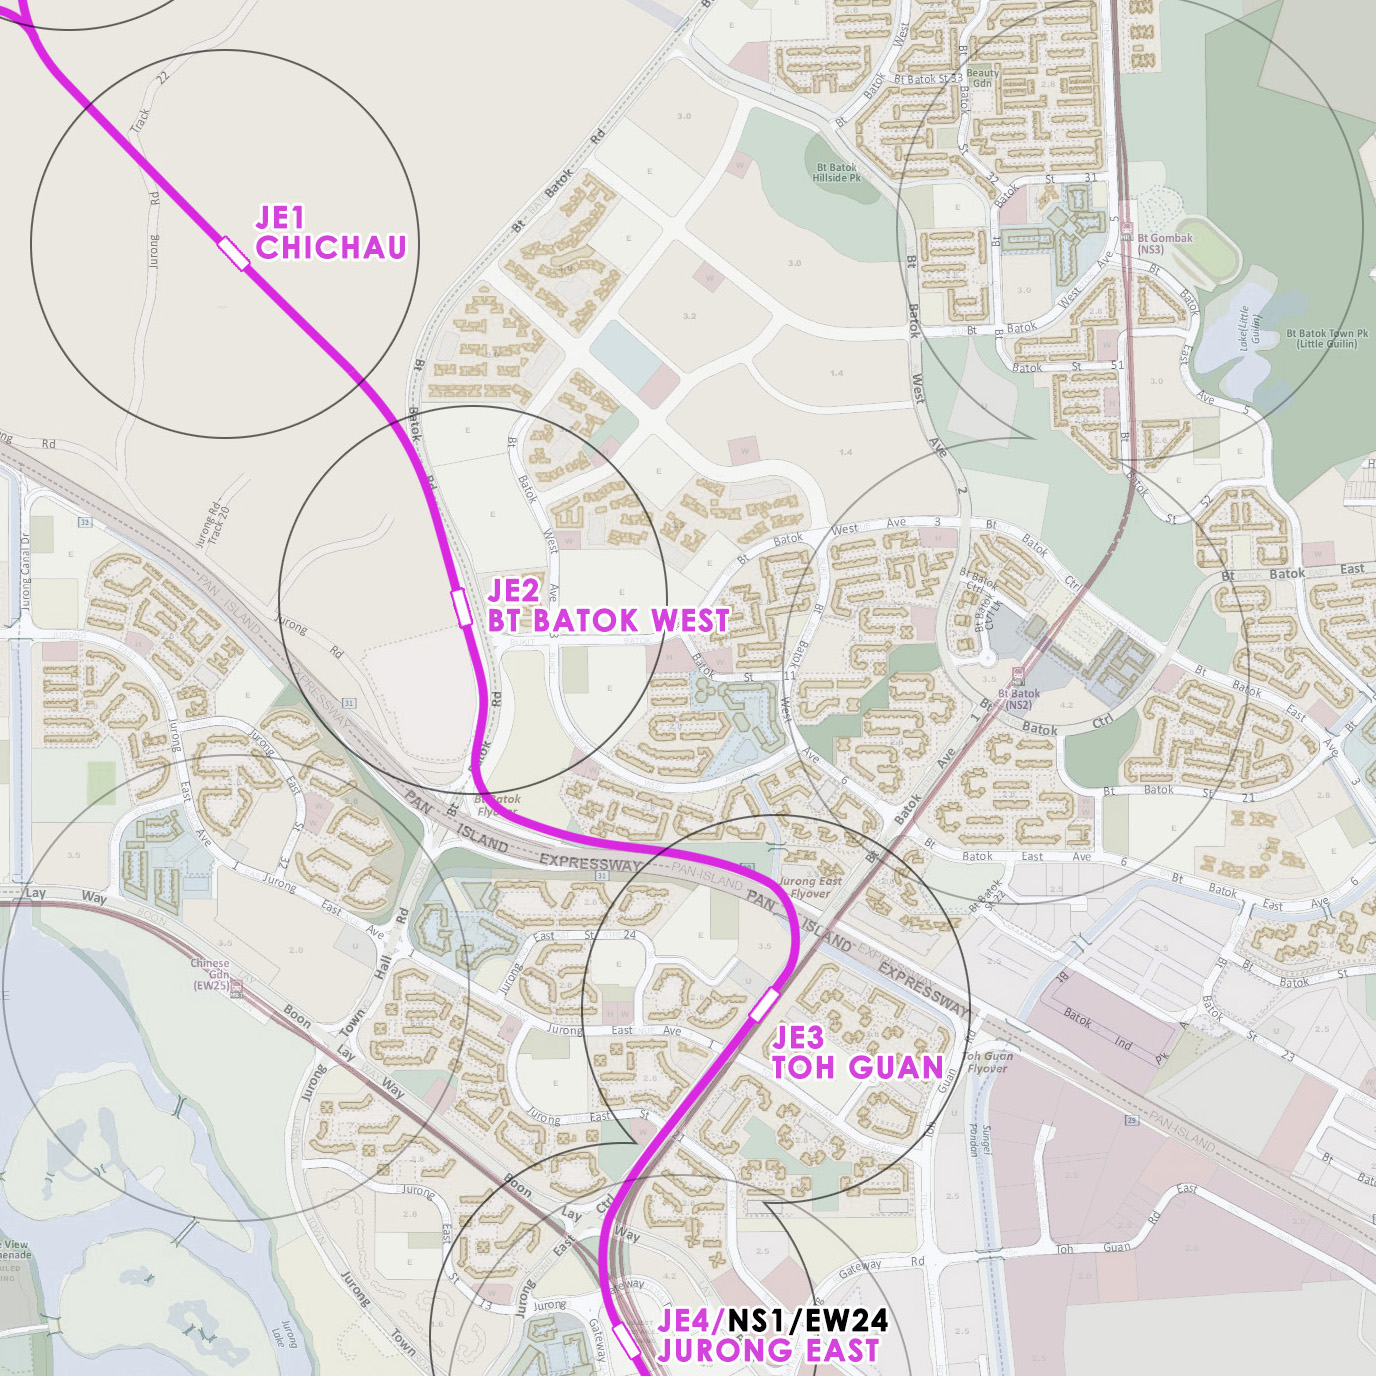 Jurong Region Line Construction: Speculative station locations